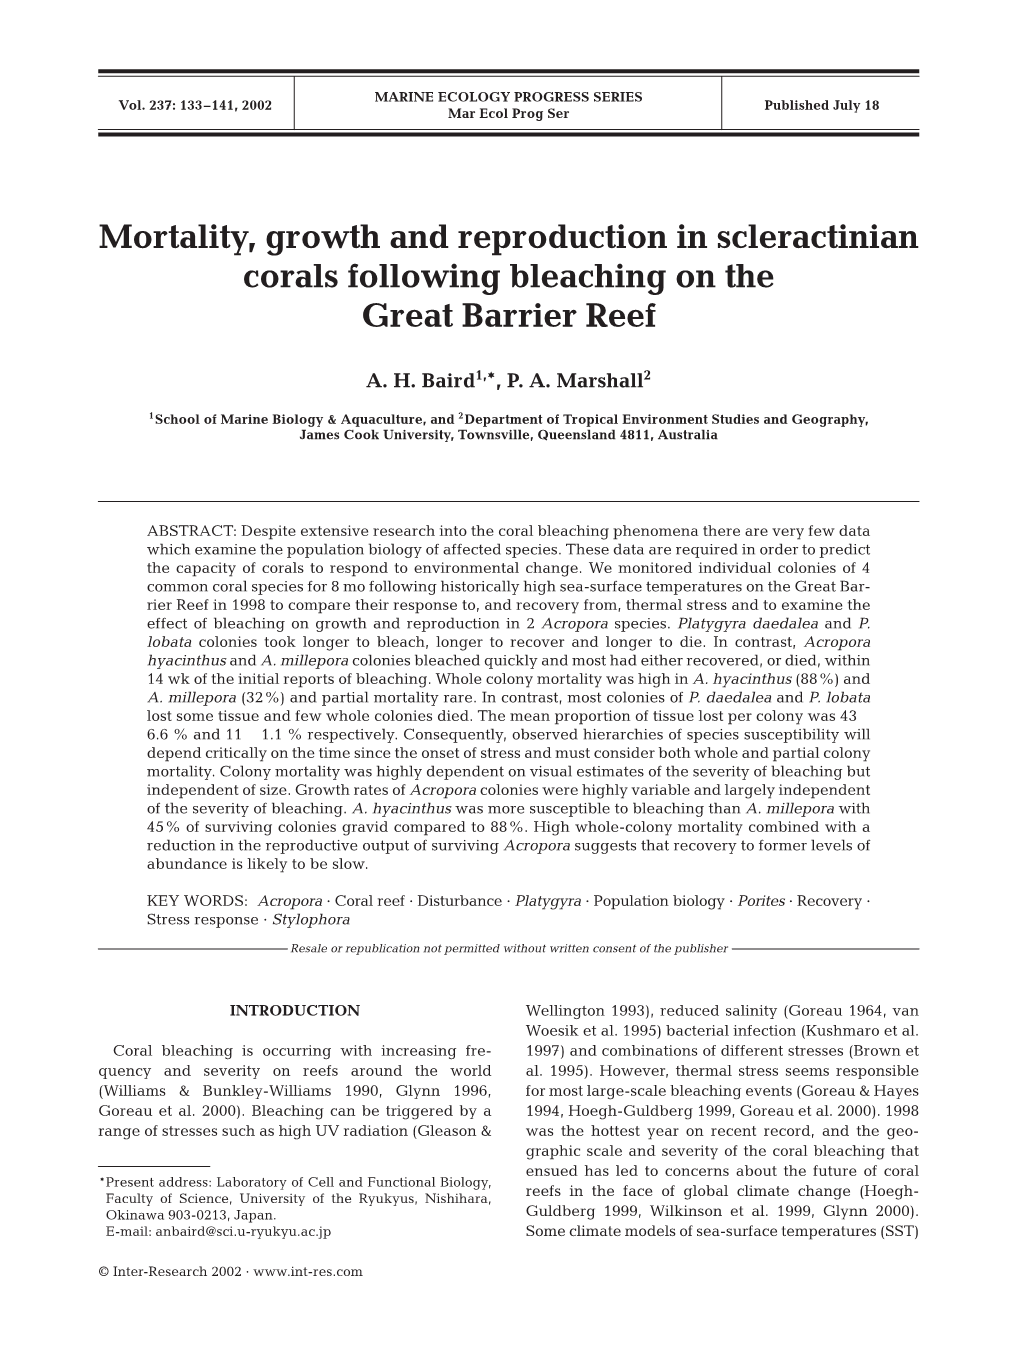 Mortality, Growth and Reproduction in Scleractinian Corals Following Bleaching on the Great Barrier Reef